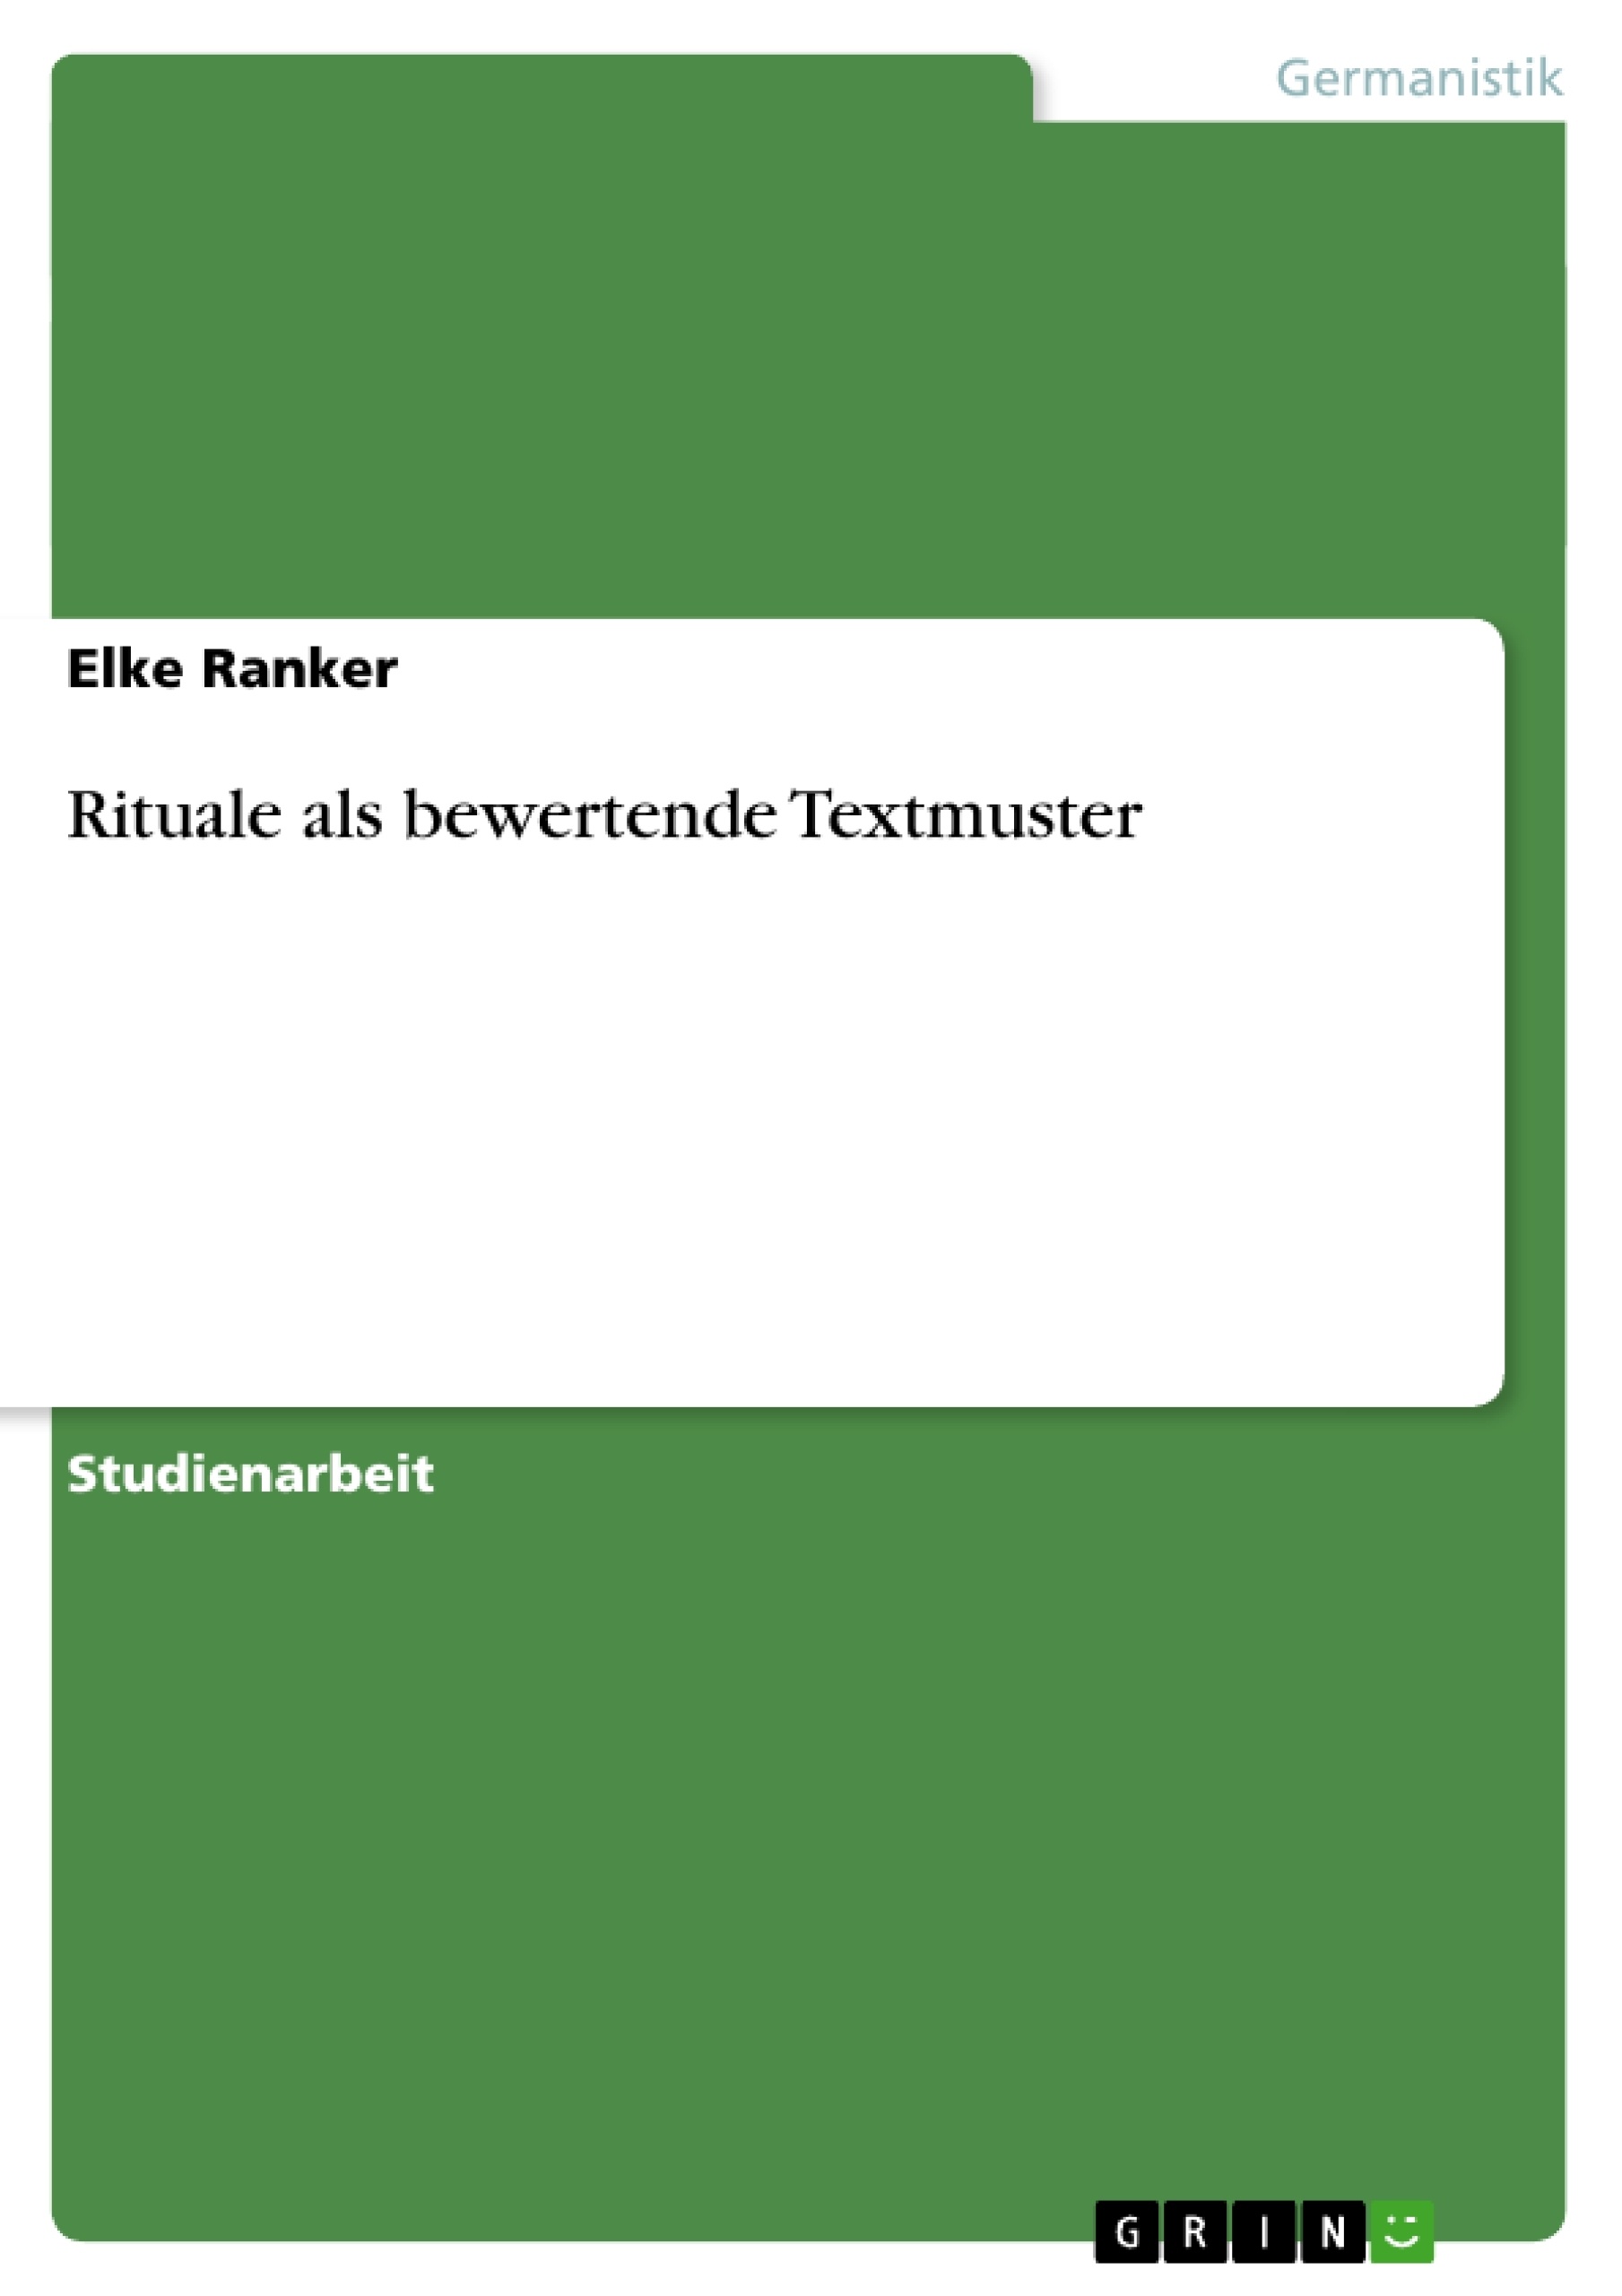 Title: Rituale als bewertende Textmuster